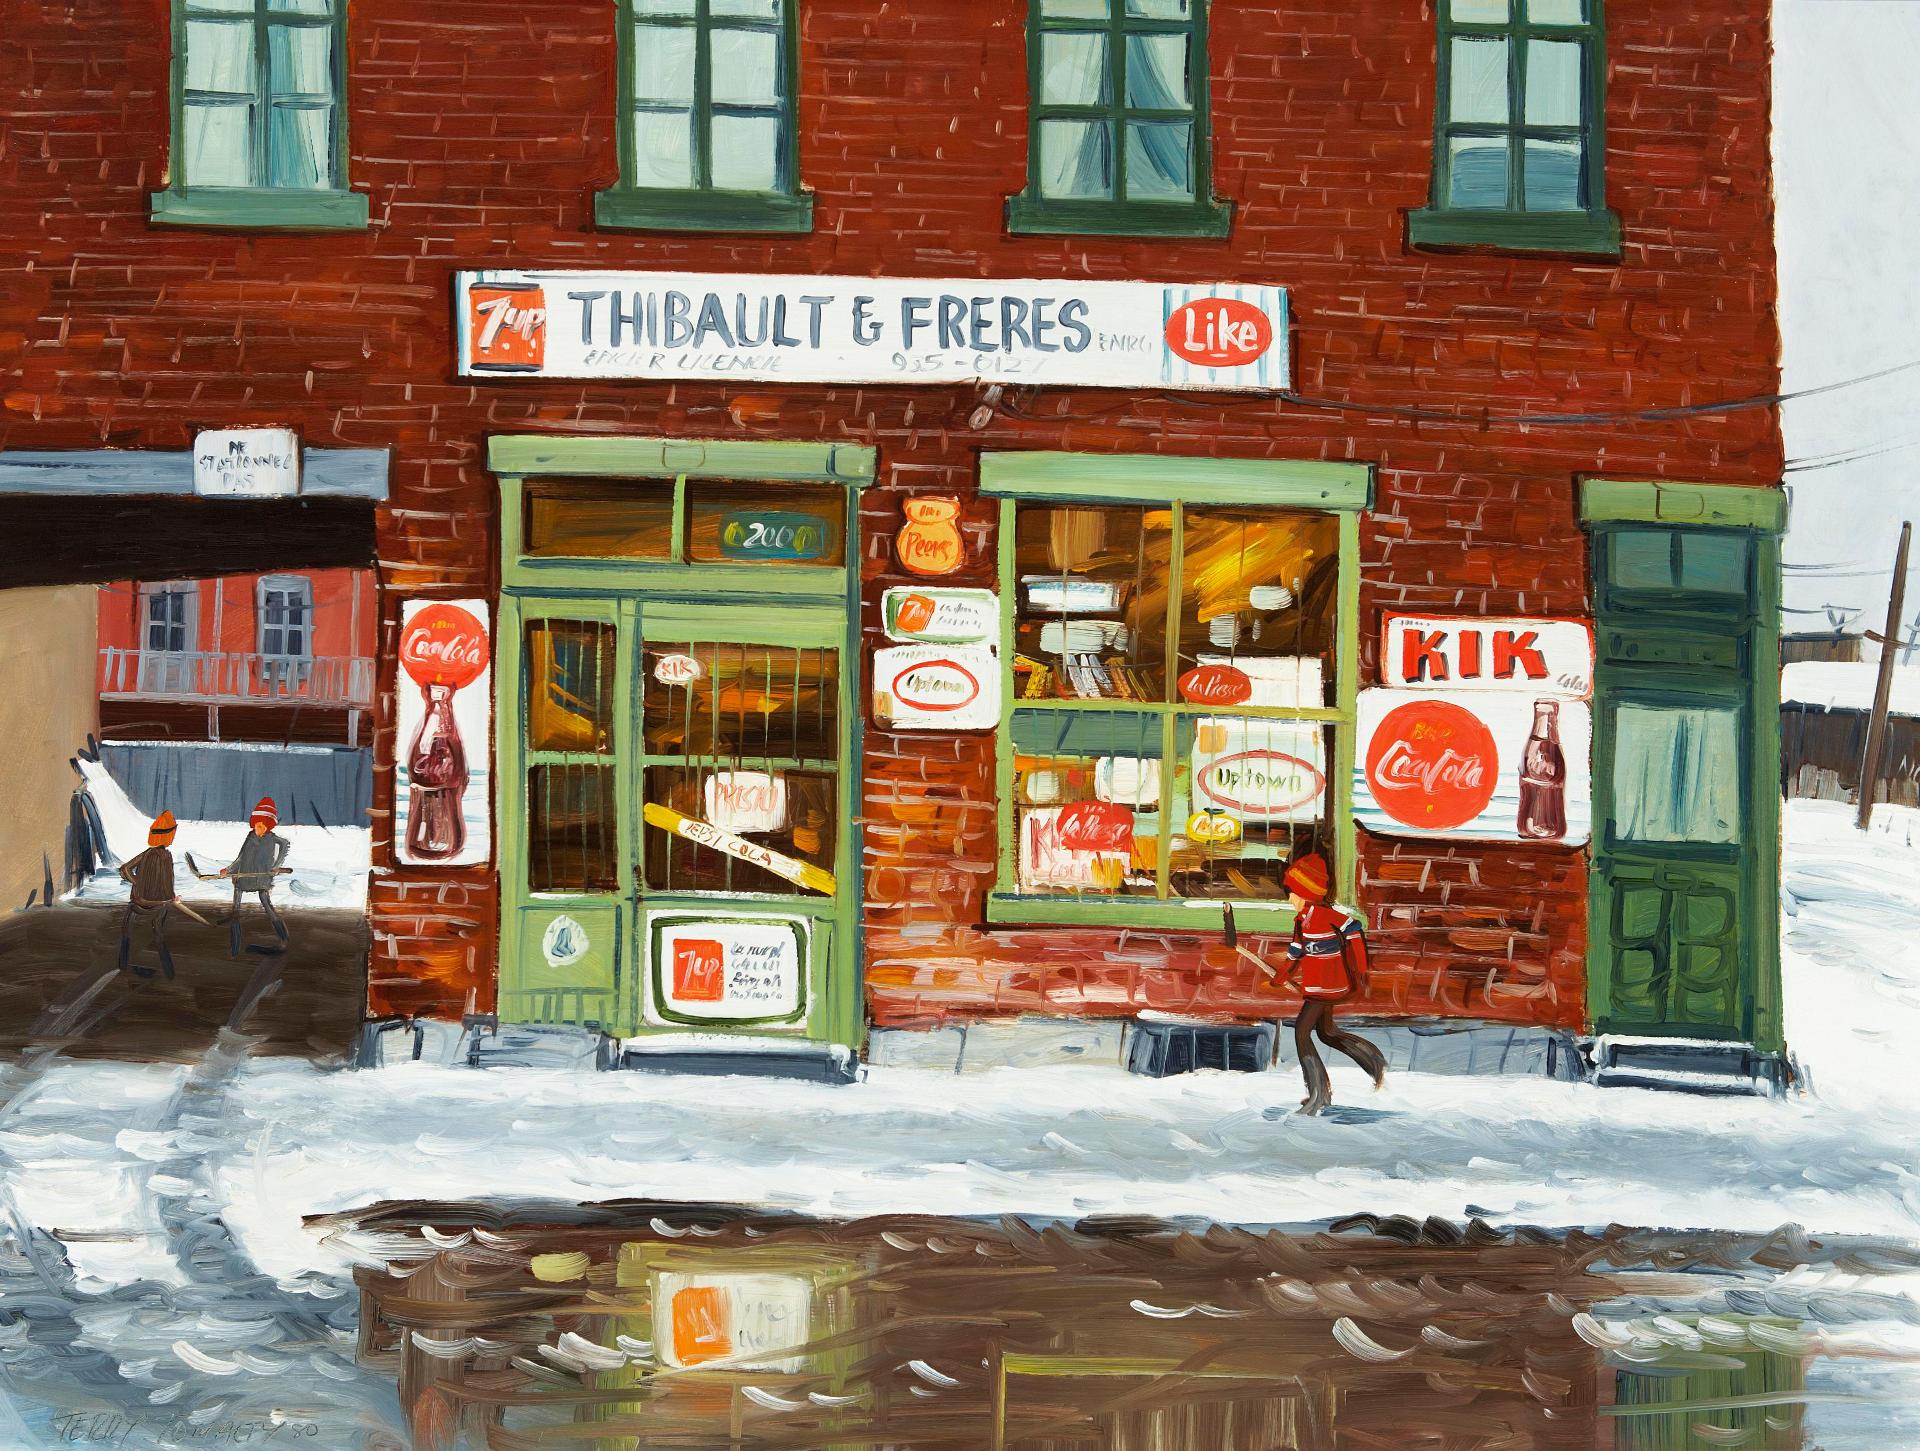 Terry Tomalty (1935) - Thibault and Freres, Griffintown